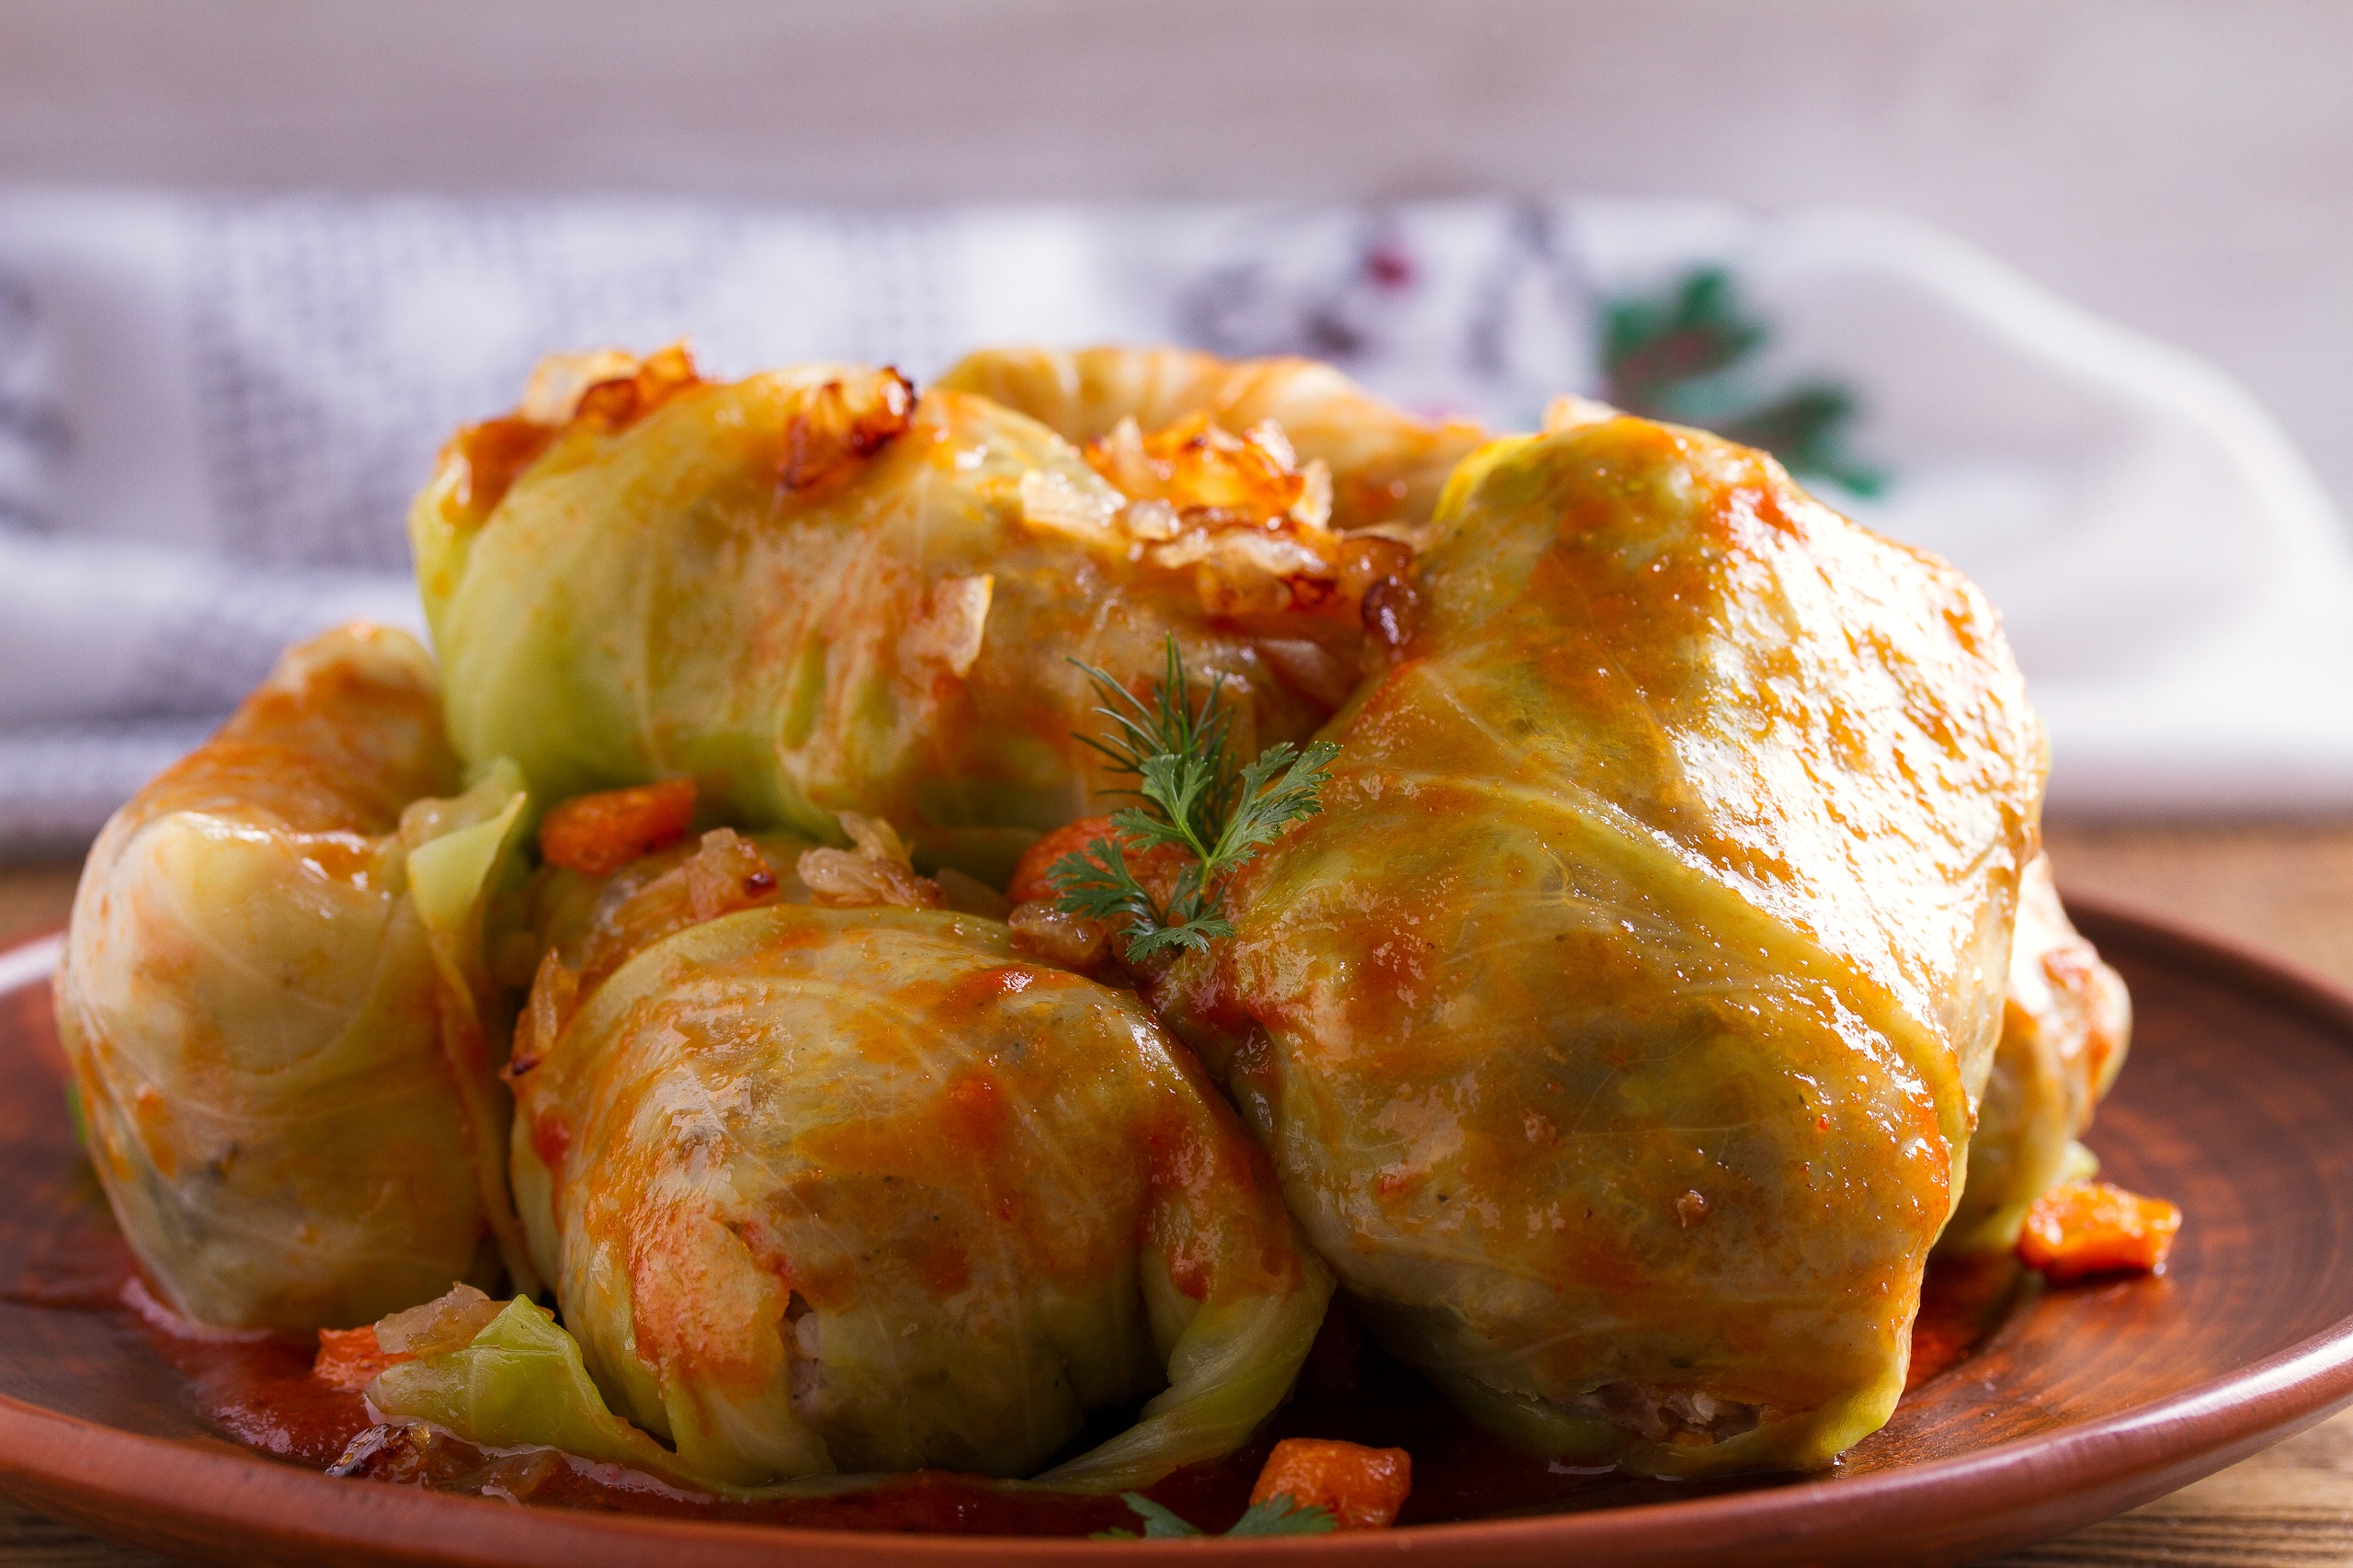 Stuffed cabbage rolls filled with sautéed ground meats, cooked rice, and roasted vegetables, stacked on a brown plate and garnished with parsley.